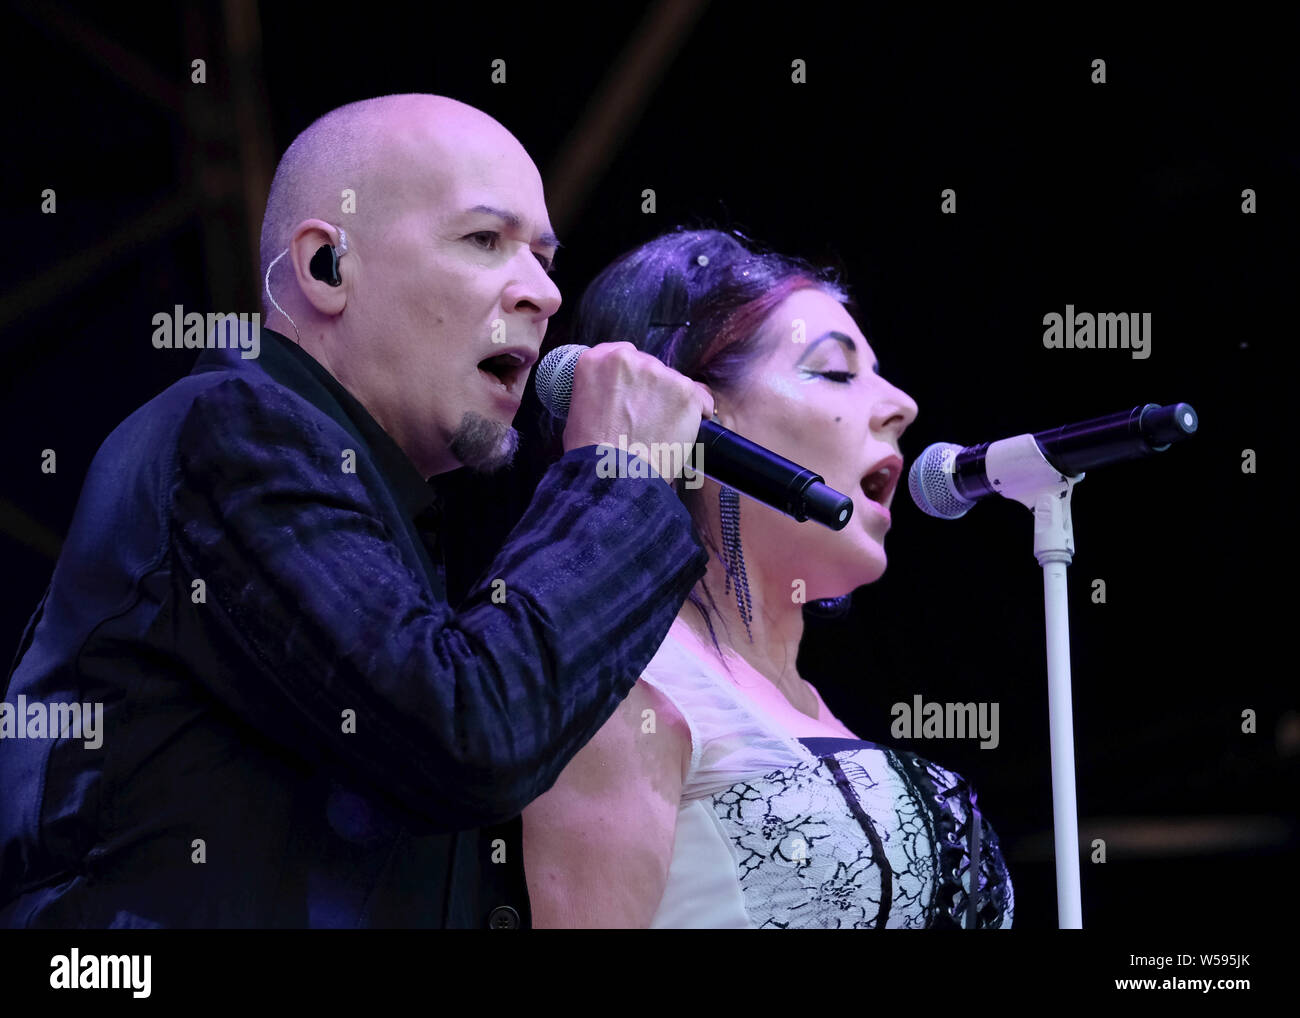 Phil Oakey High Resolution Stock Photography and Images - Alamy